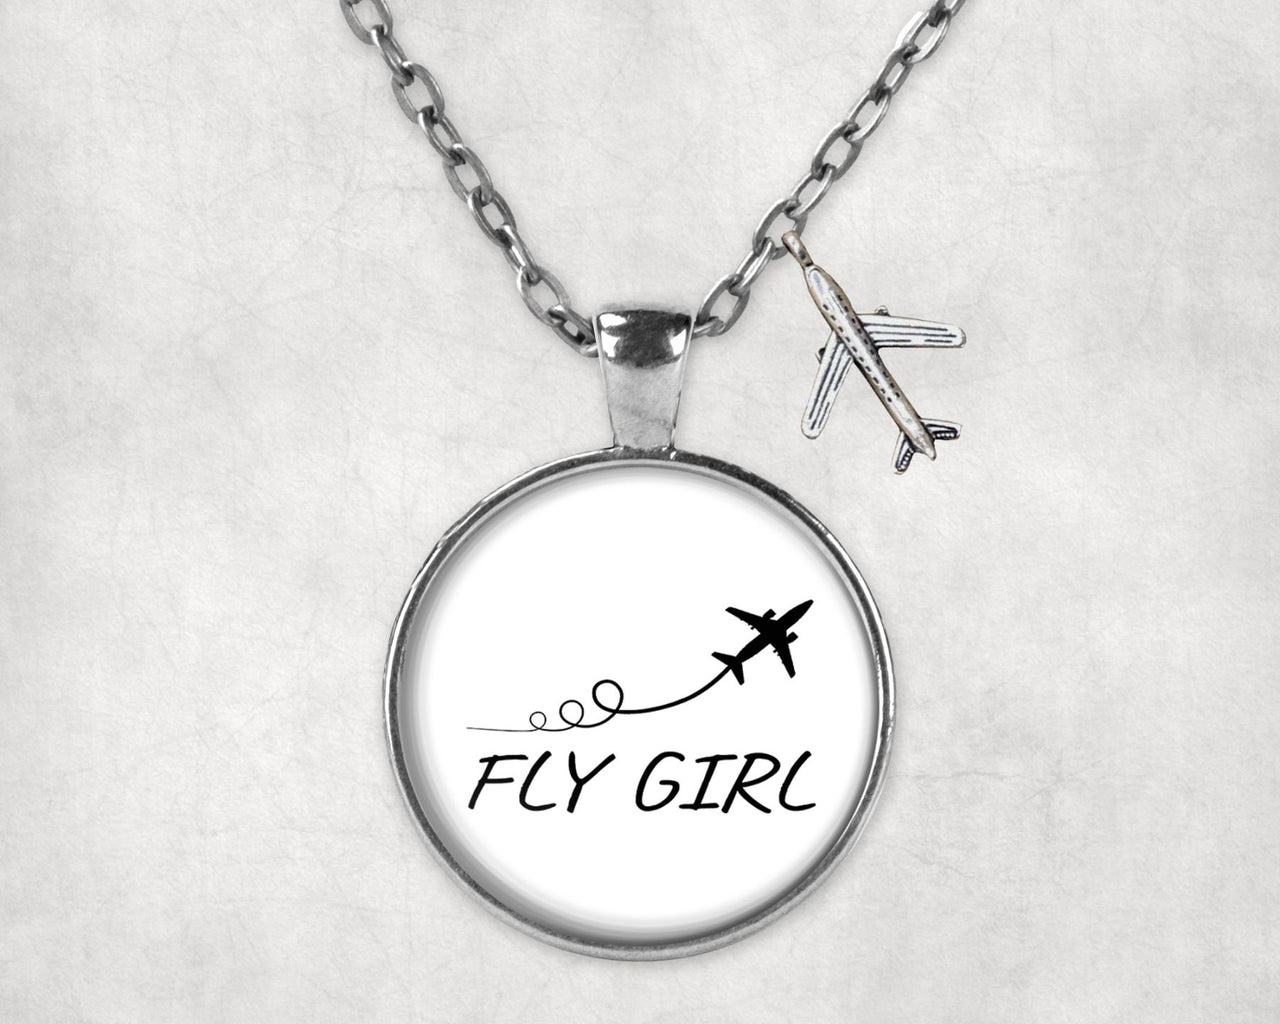 Just Fly It & Fly Girl Designed Necklaces